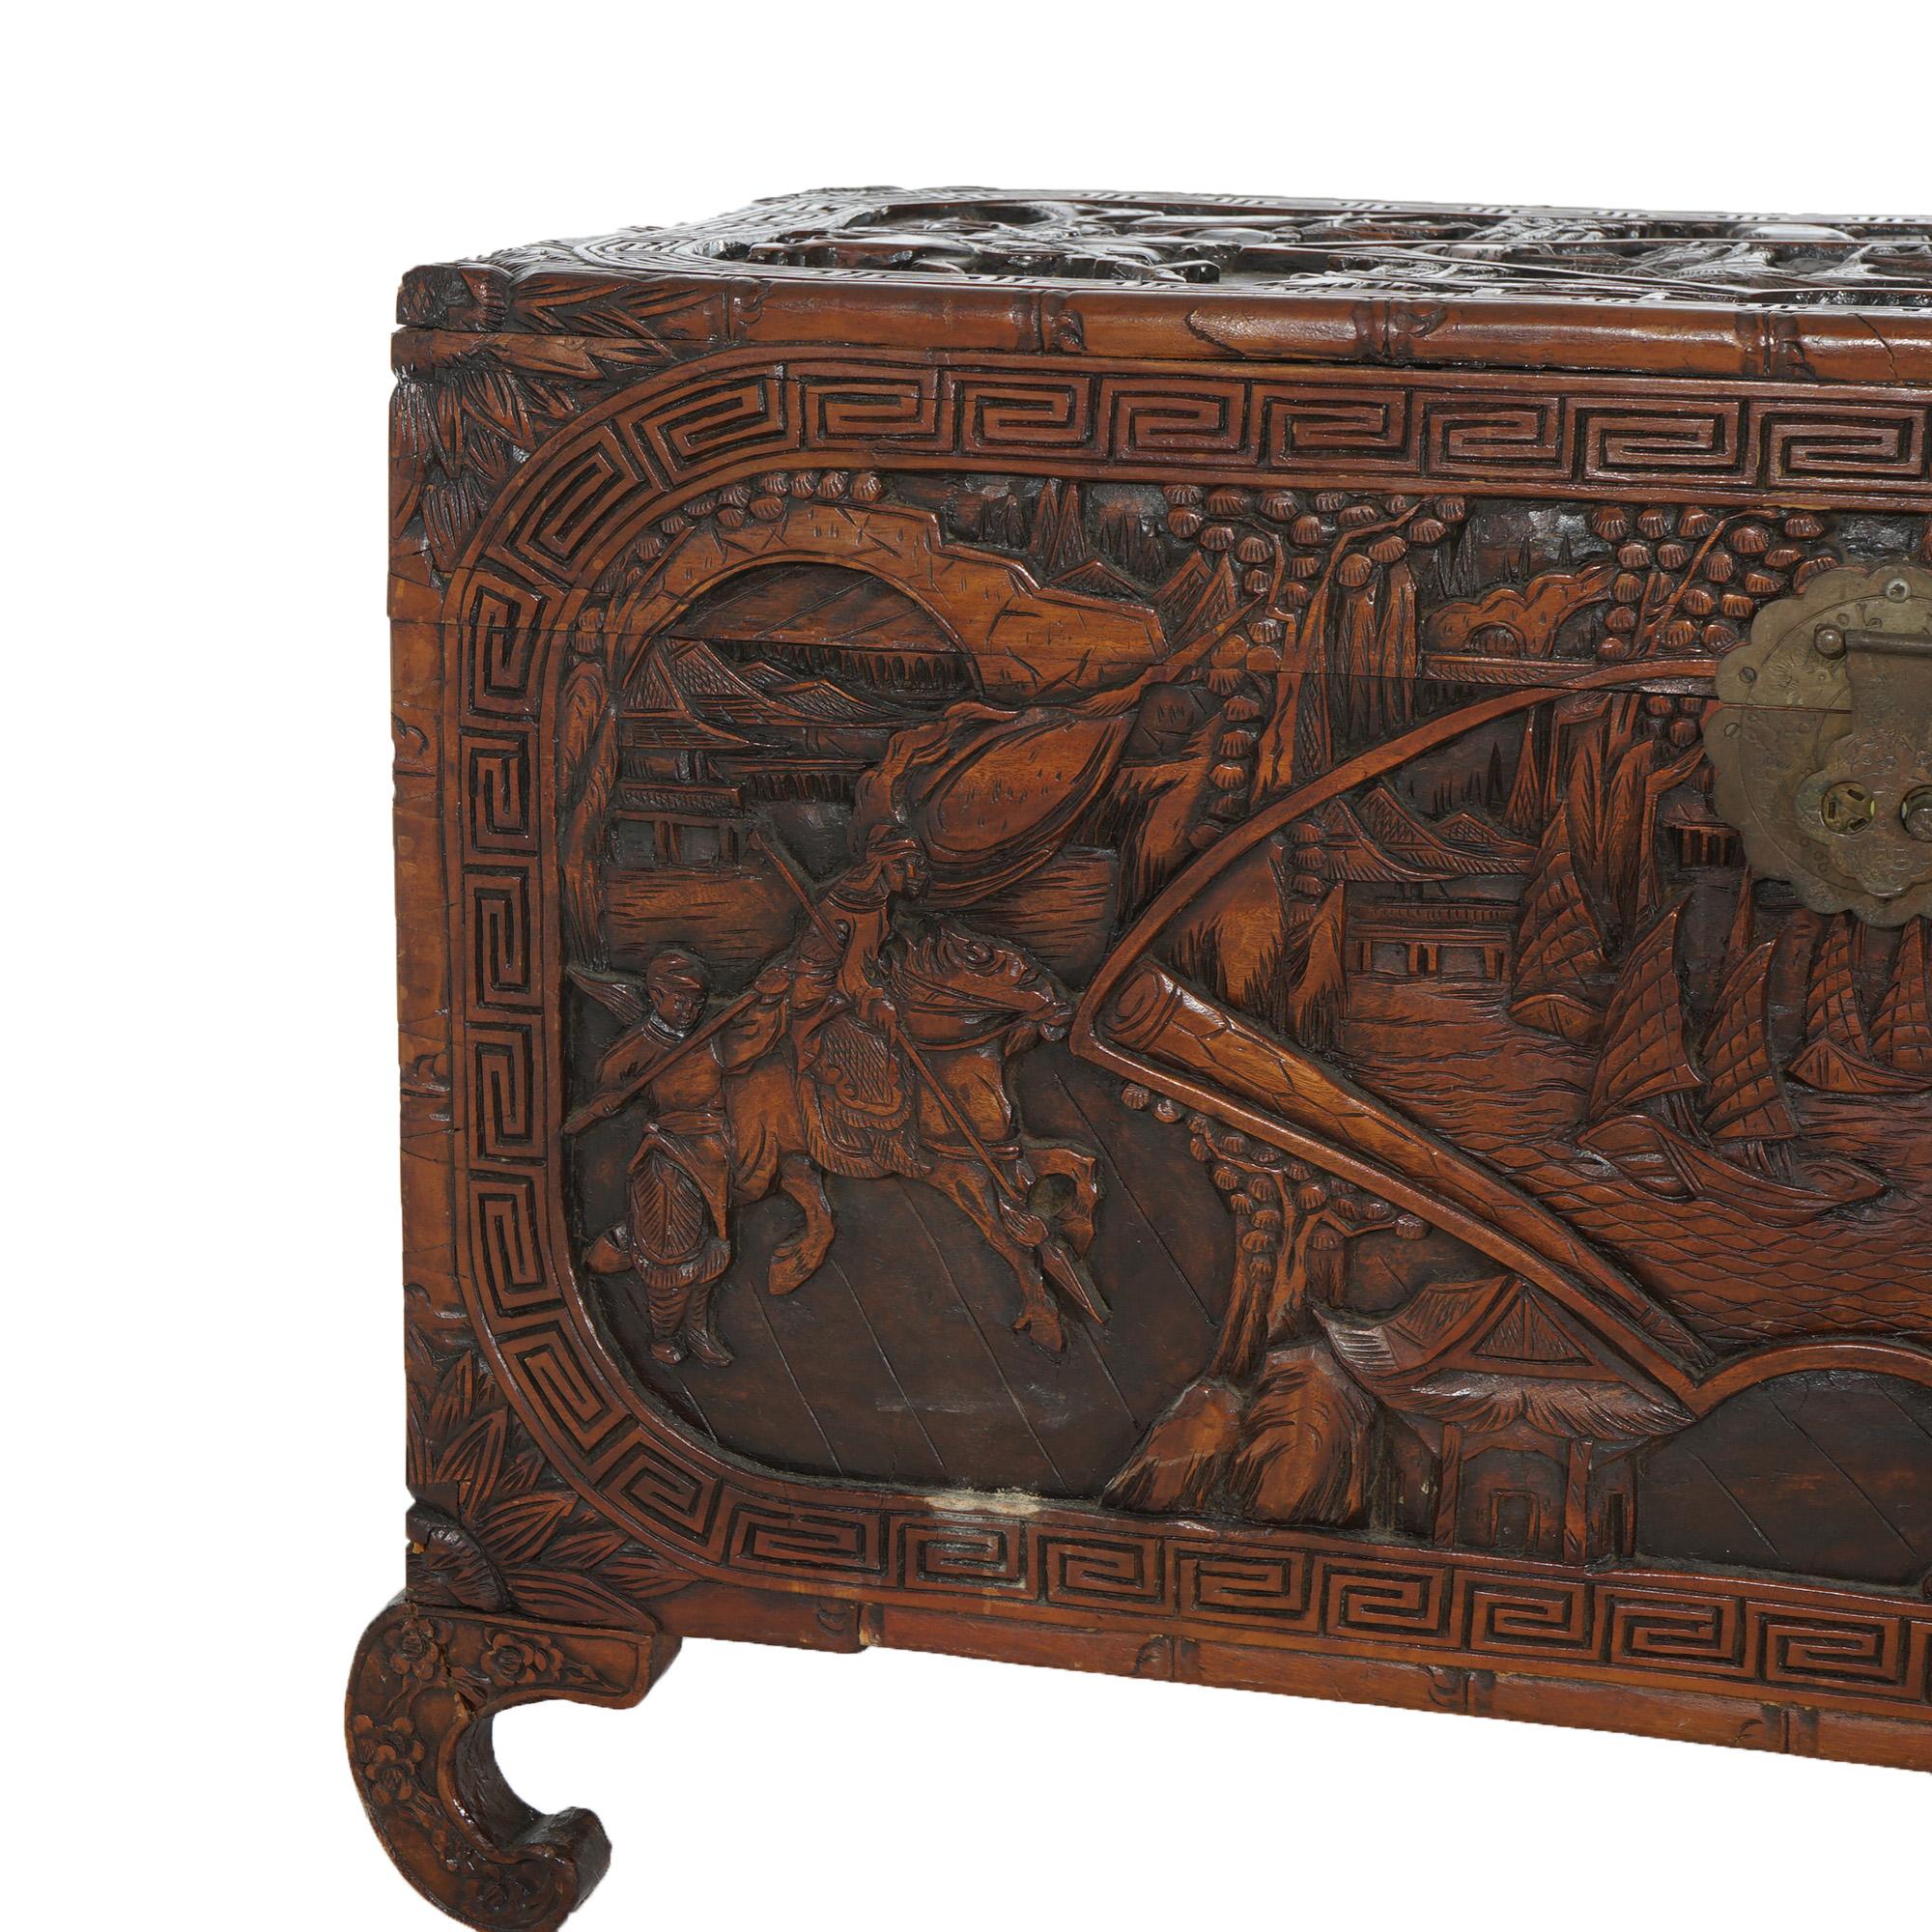 Antique Chinese Carved Hardwood Chest with Figures & Scenes in Relief C1920 For Sale 2